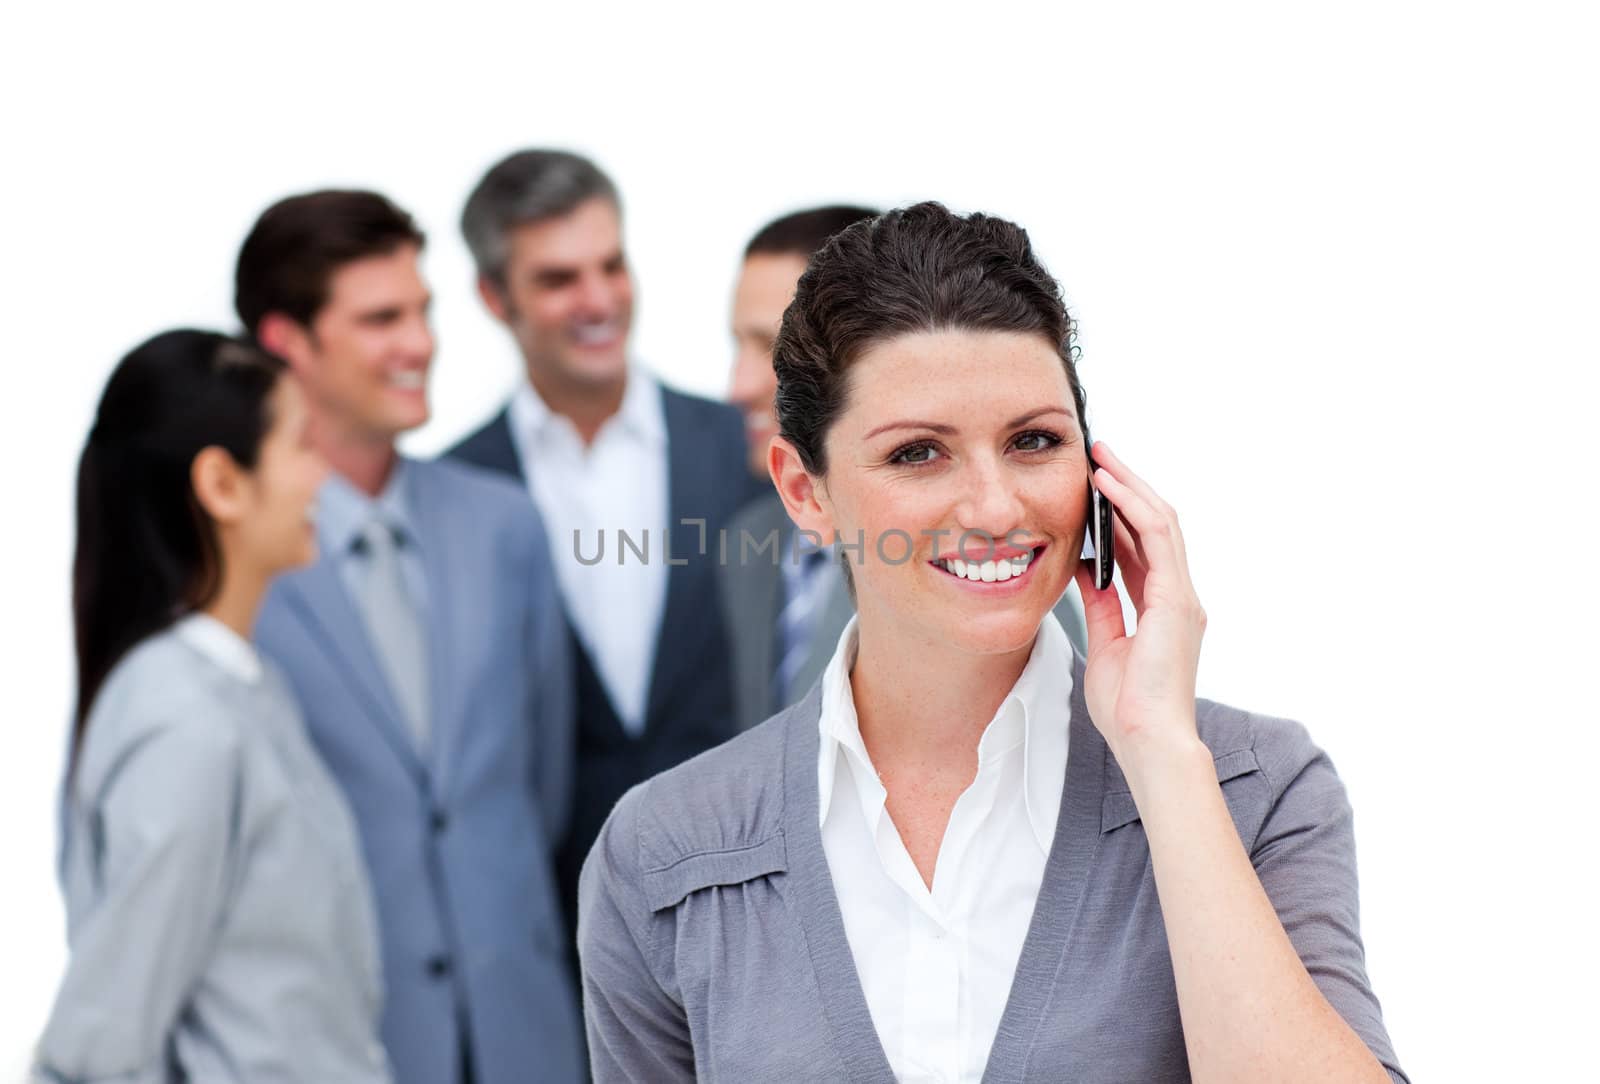 Brunette woman talking on phone in front of her team against a white background